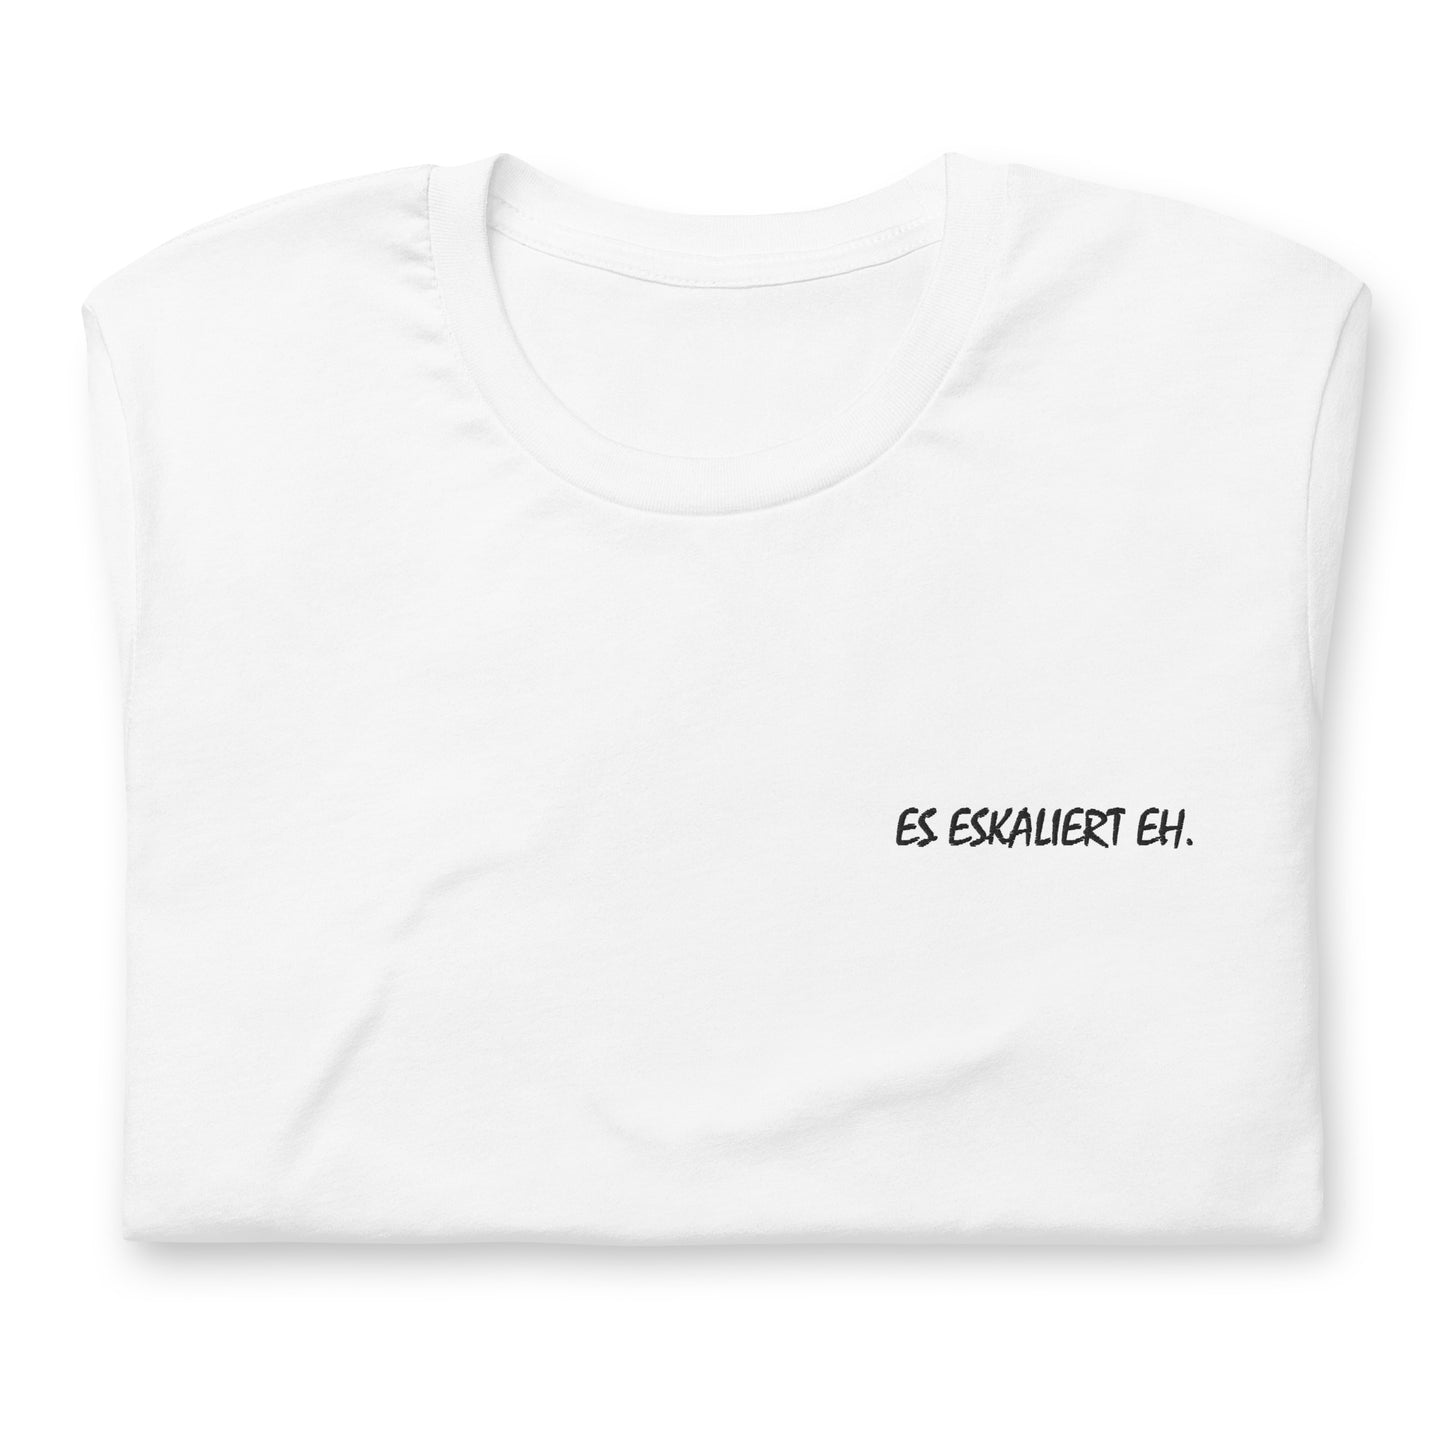 IT'S ESCALATED EH. - embroidered T-shirt